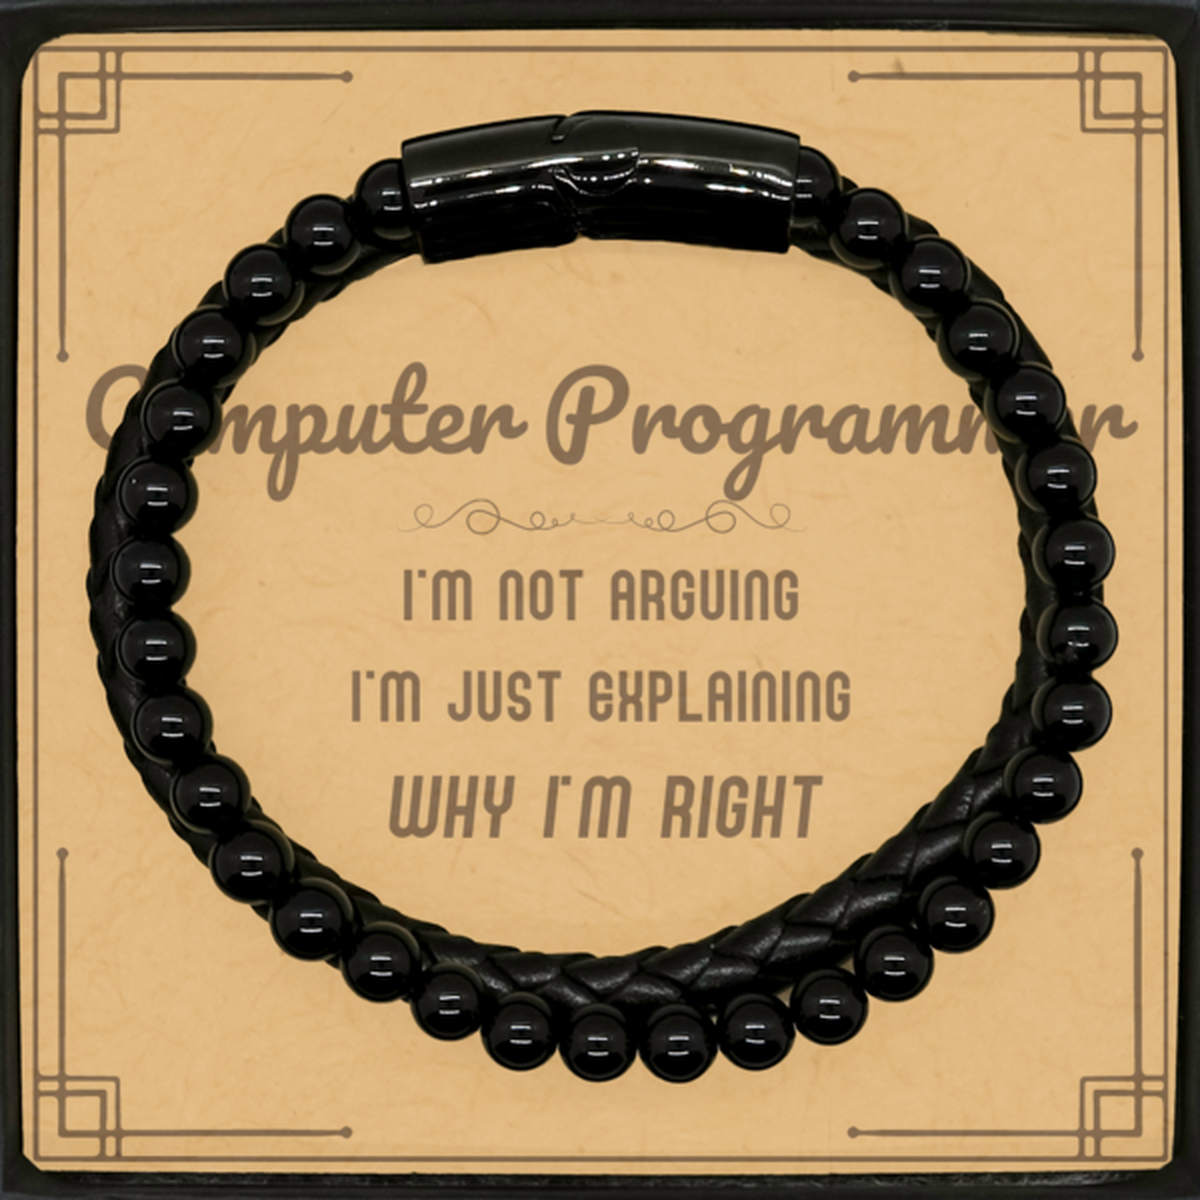 Computer Programmer I'm not Arguing. I'm Just Explaining Why I'm RIGHT Stone Leather Bracelets, Funny Saying Quote Computer Programmer Gifts For Computer Programmer Message Card Graduation Birthday Christmas Gifts for Men Women Coworker